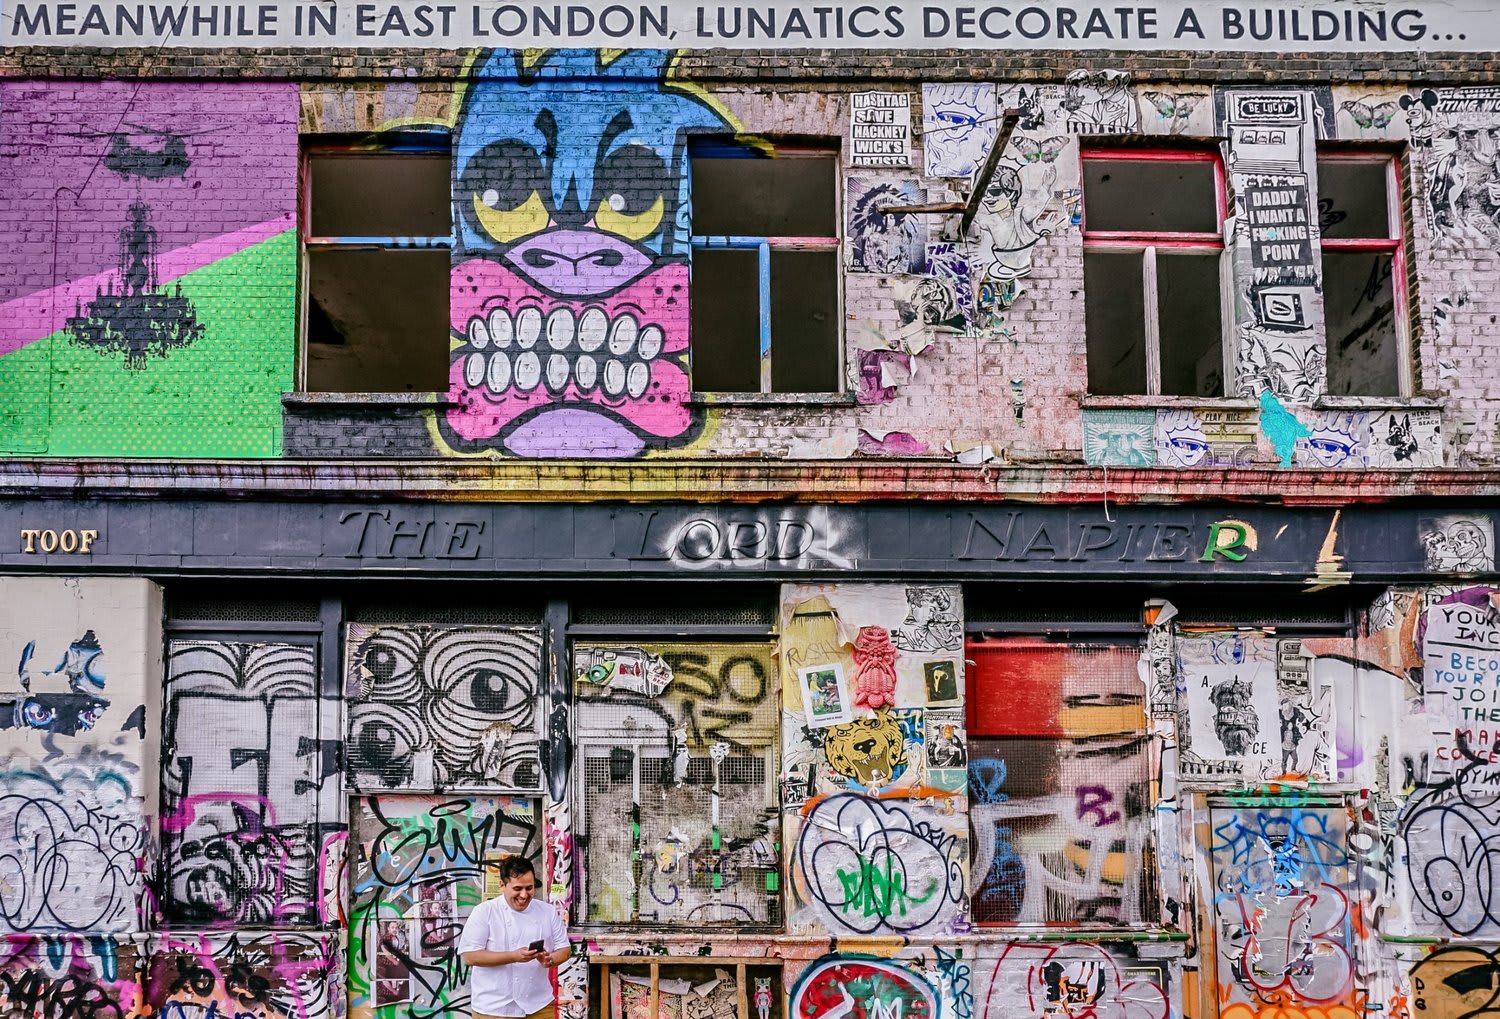 43 Quirky and unusual things to do in London that will blow your mind